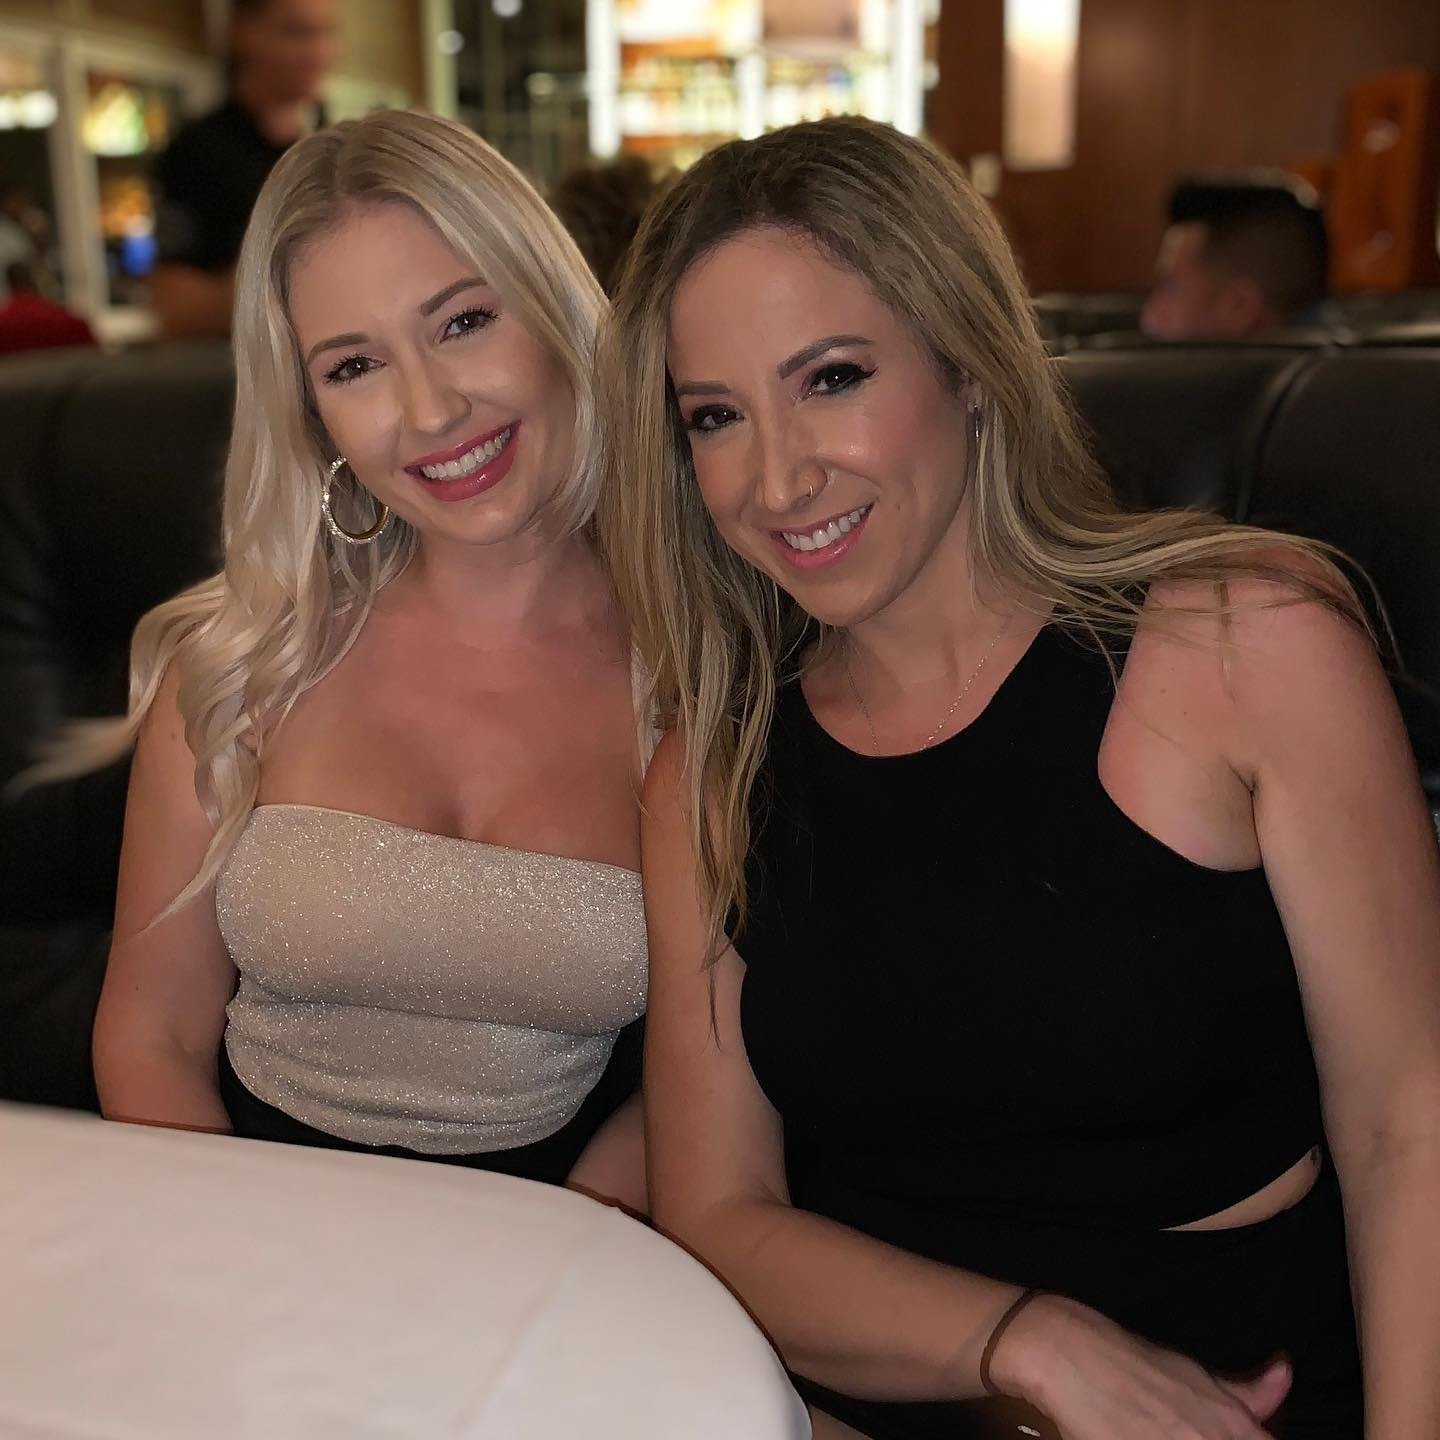 Lesbian Sisters Onlyfans - Porn Videos and Photos picture